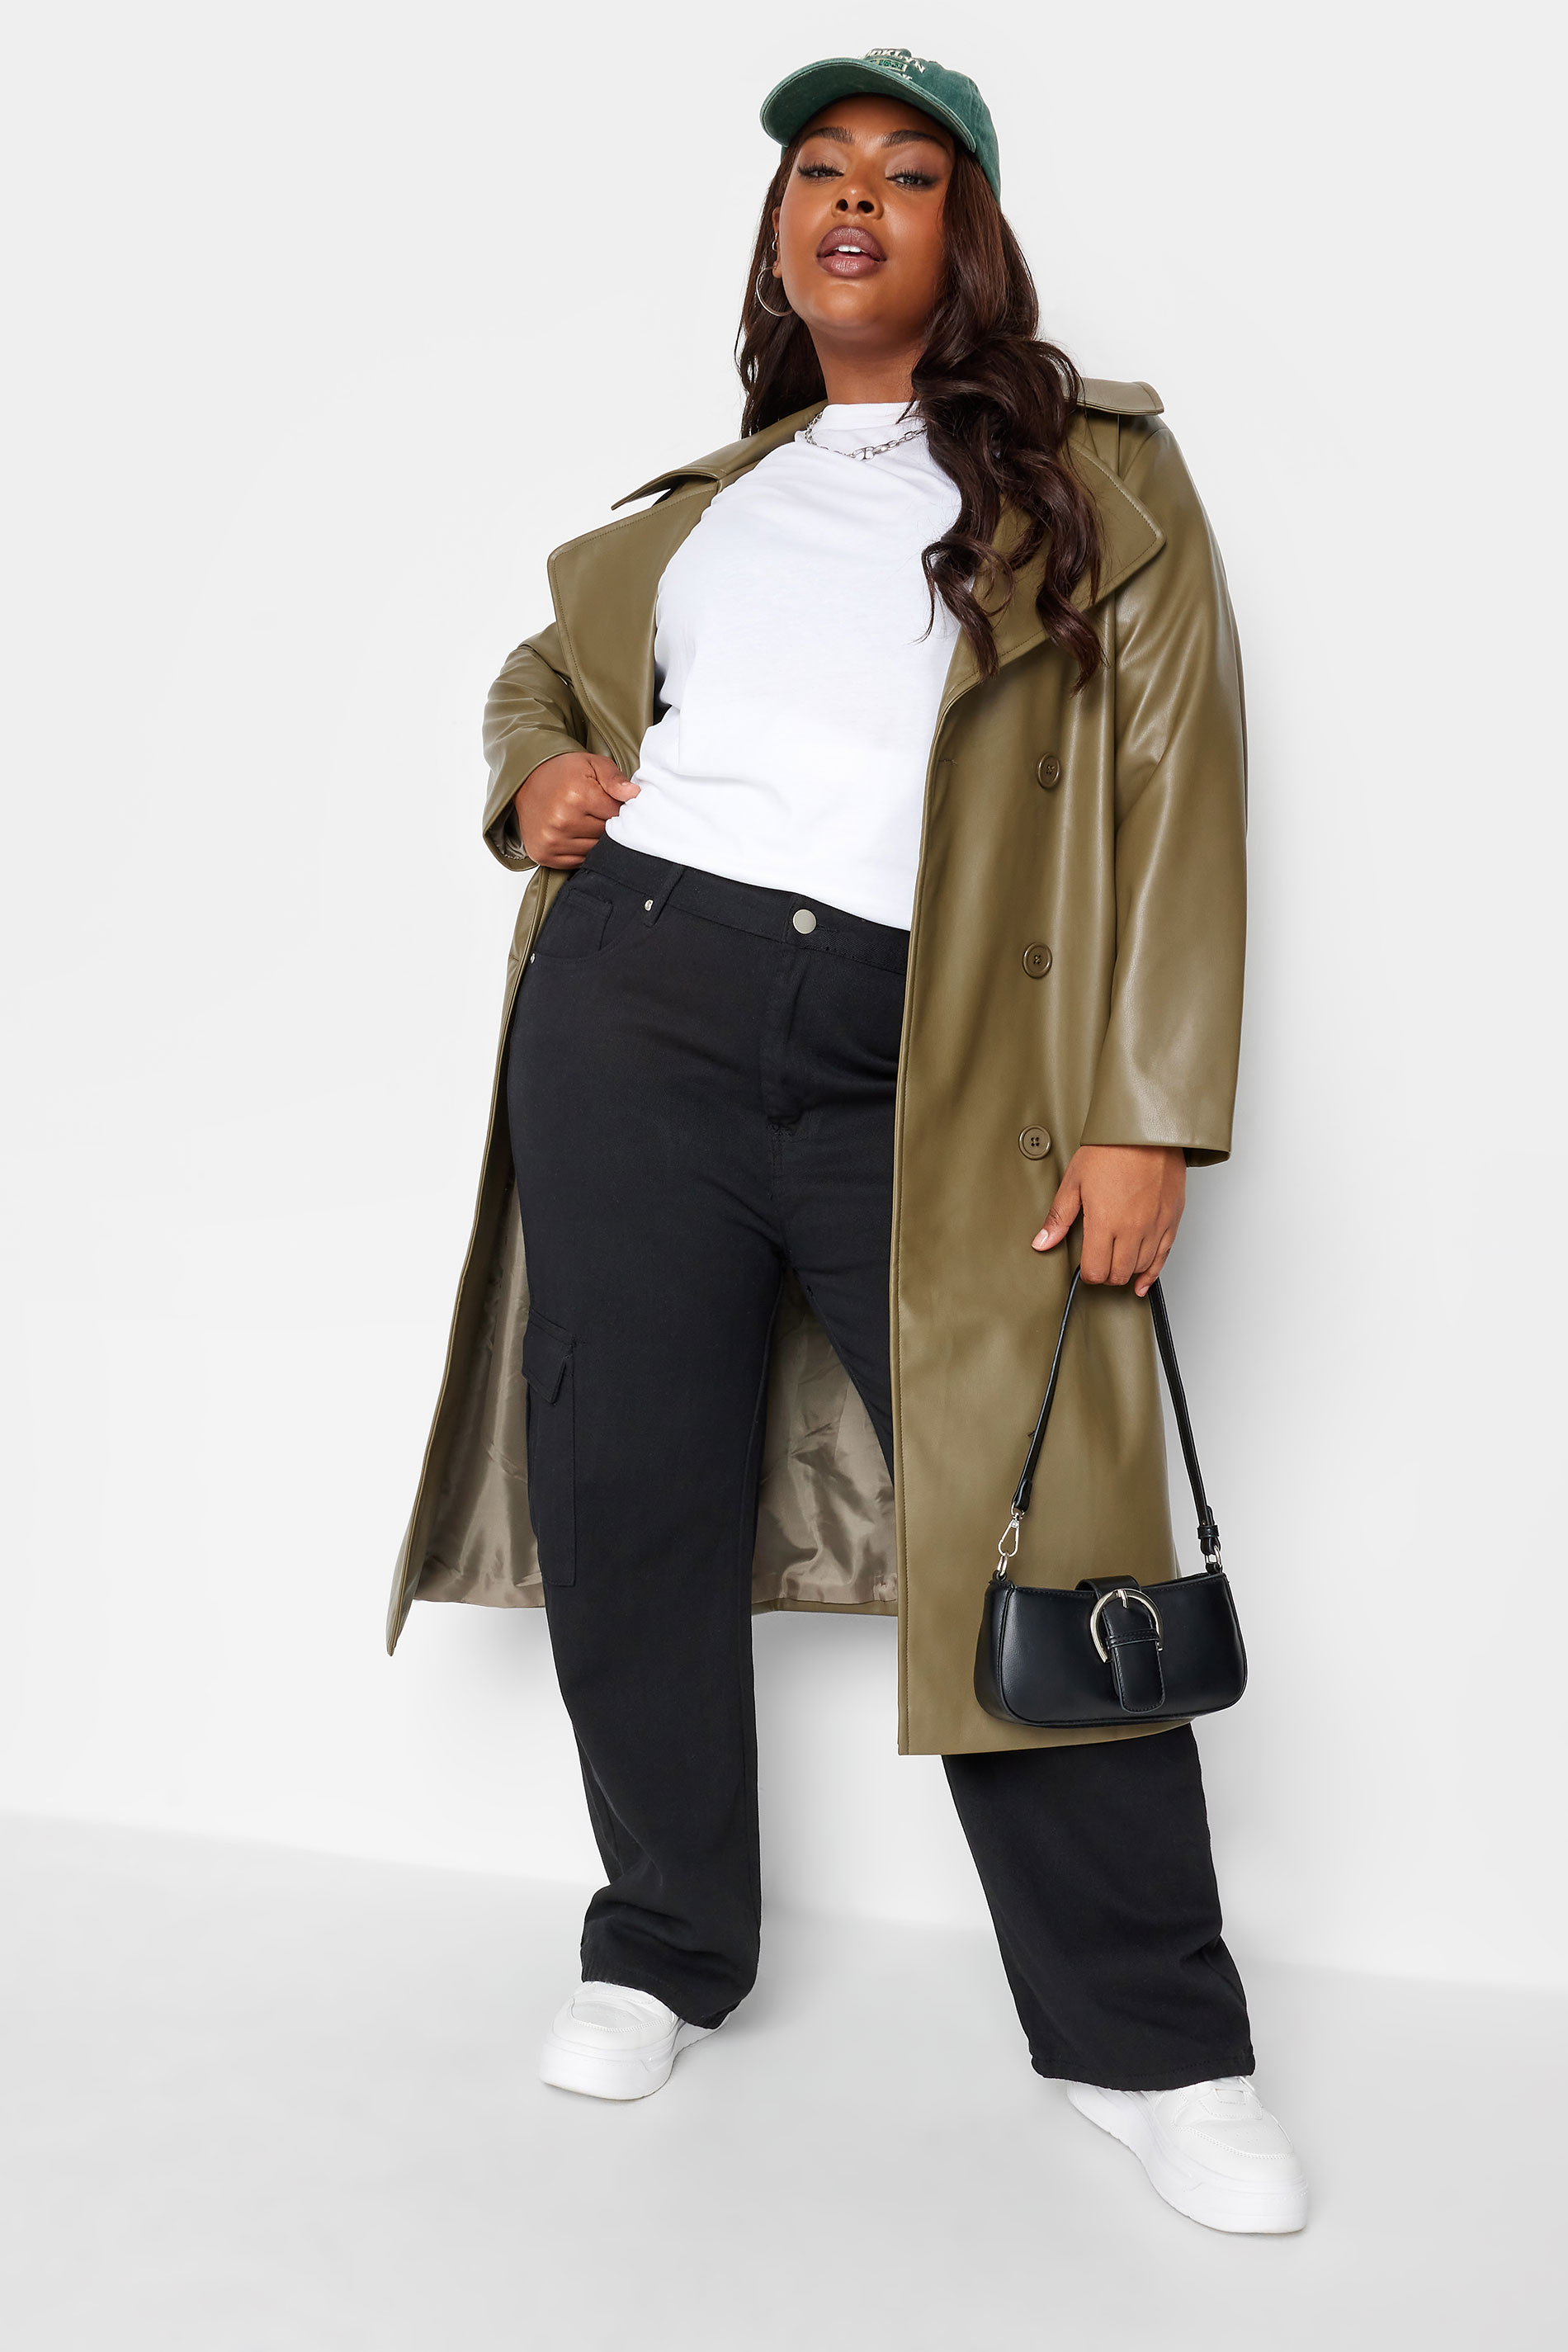 Design Over-Sized Trench Coat】-